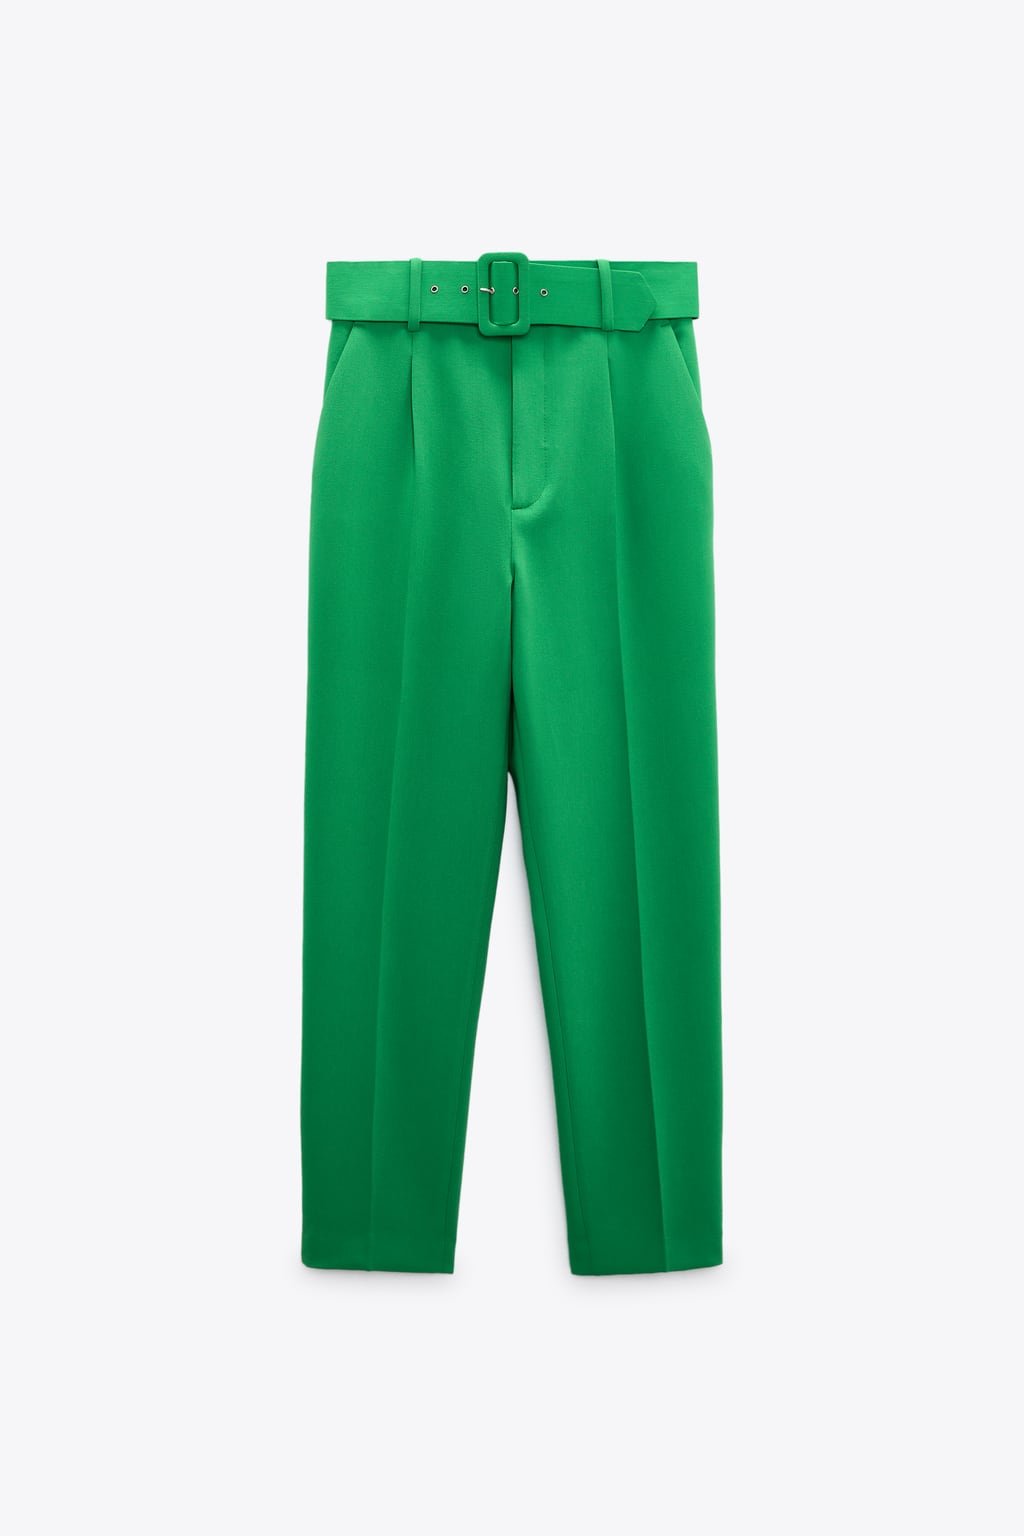 Zara Trousers with Lined Belt in Green — UFO No More